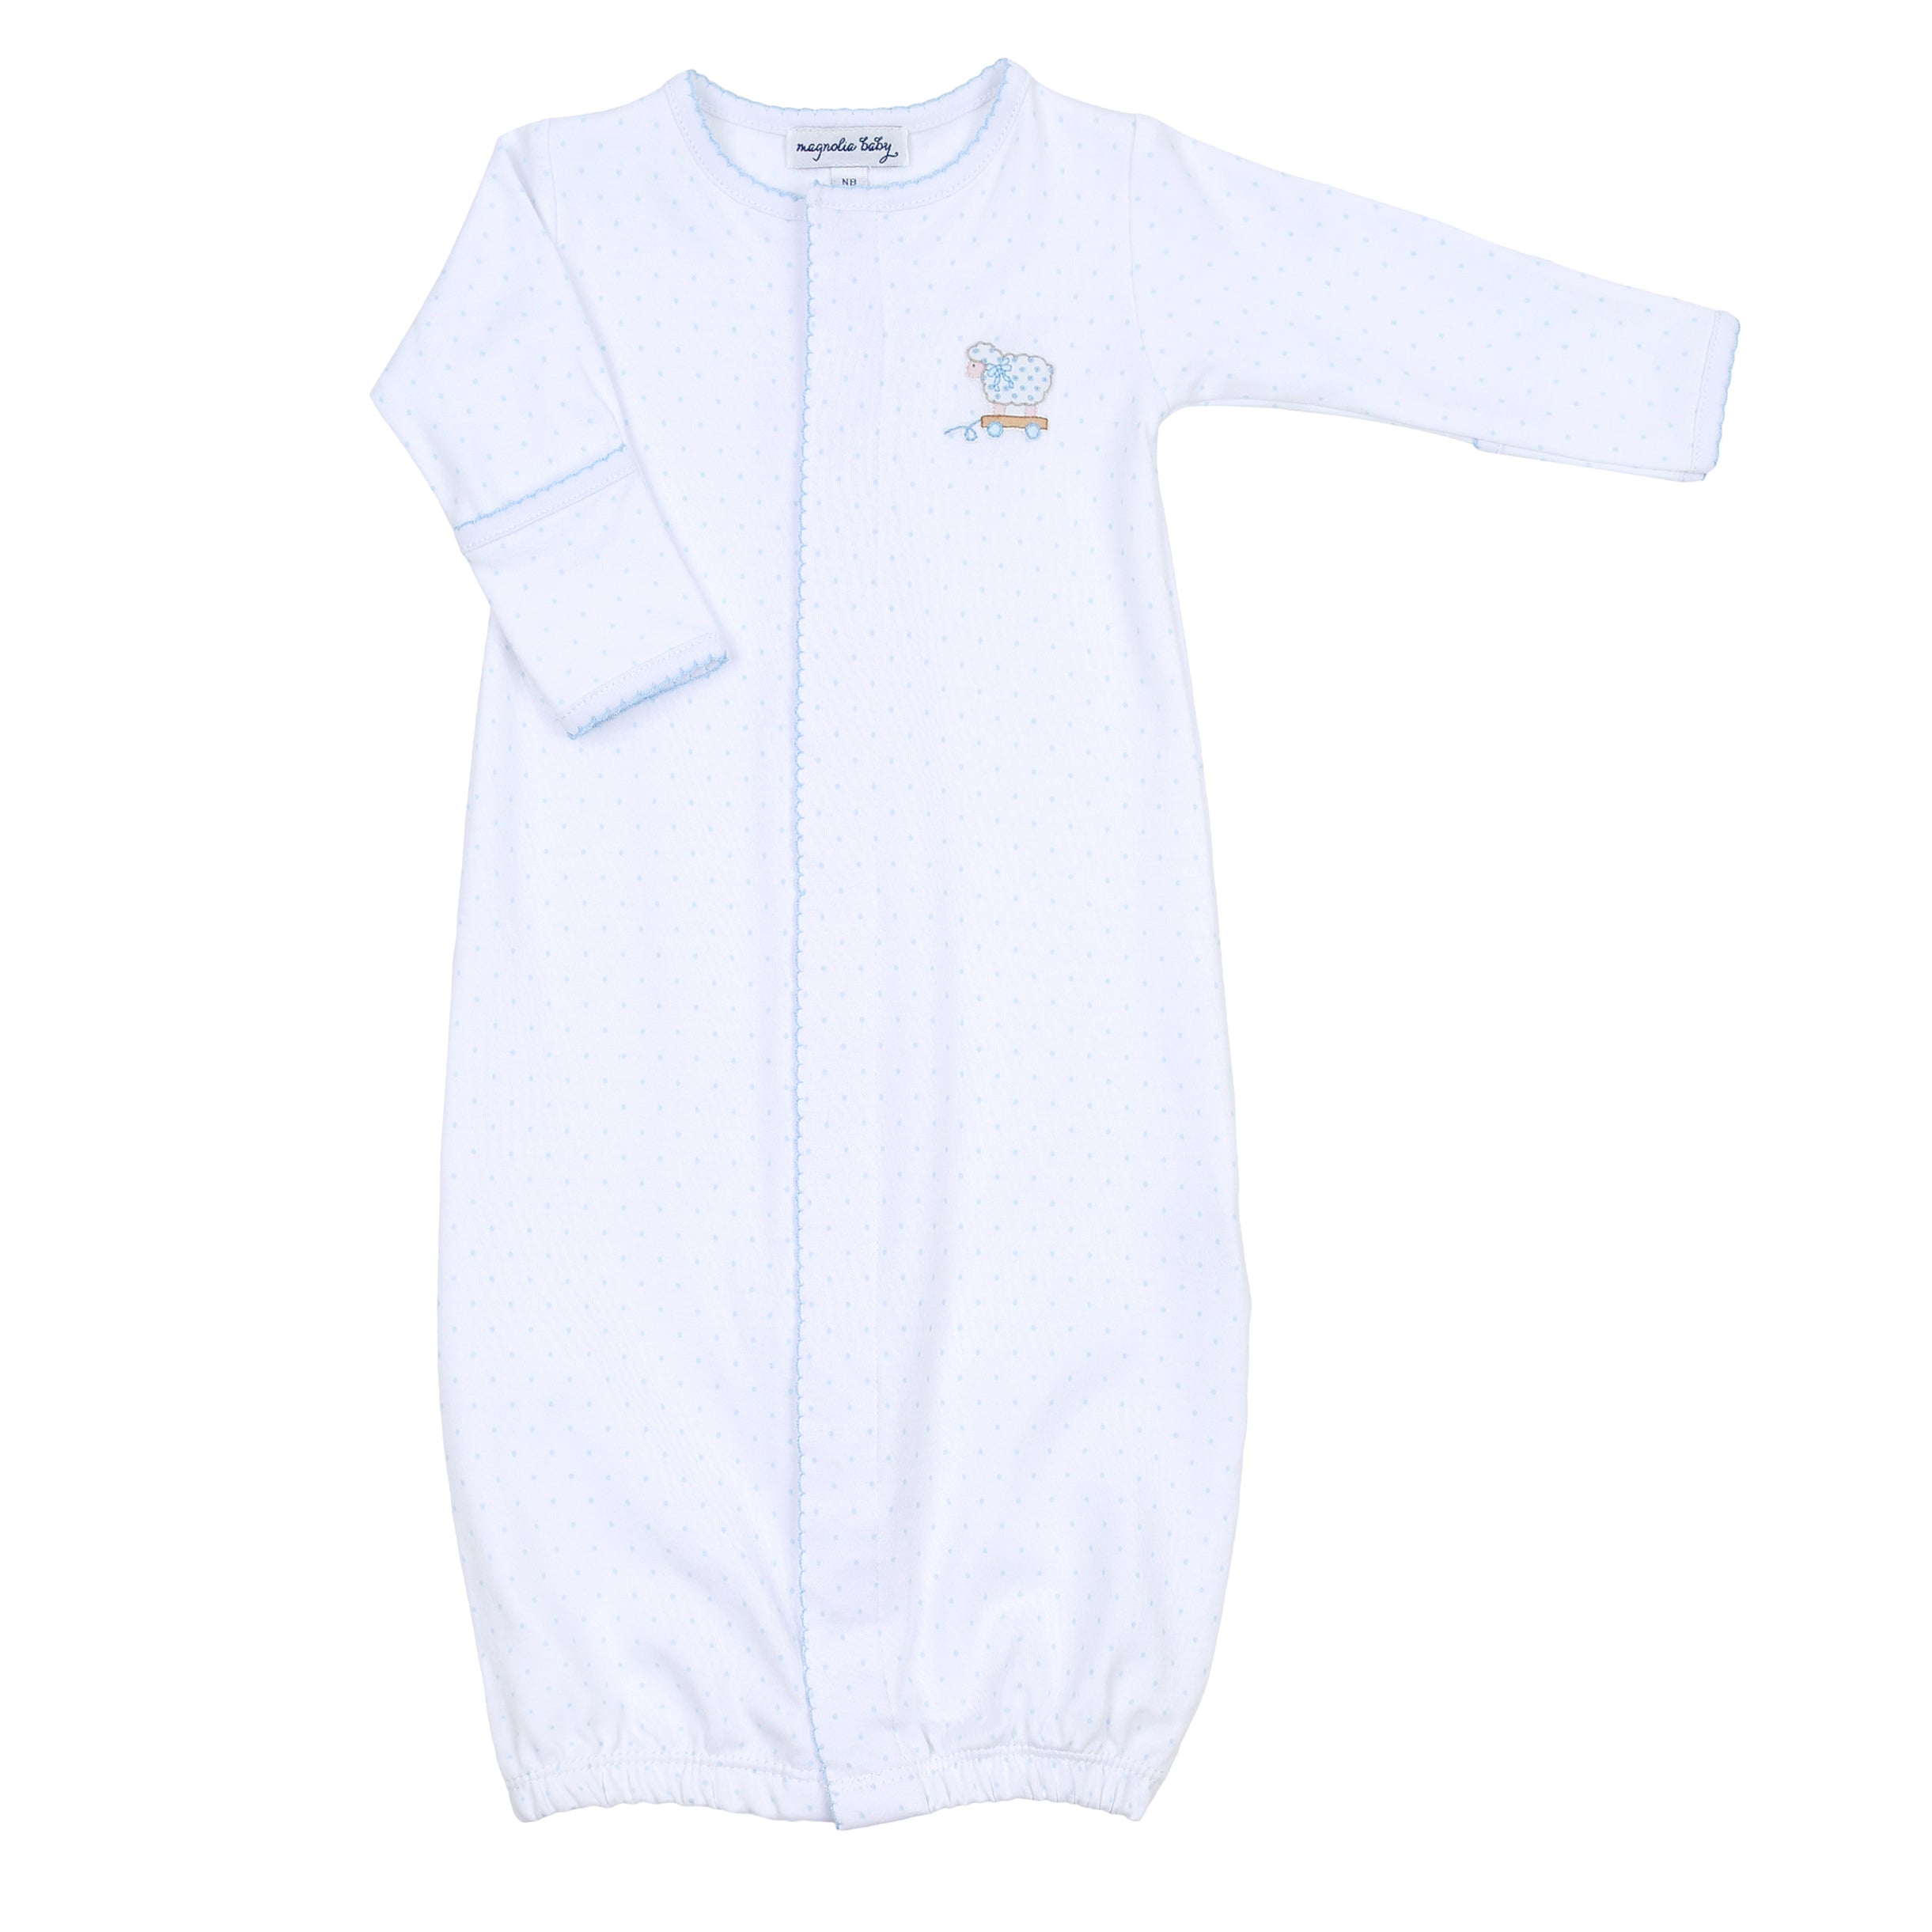 Blue Darling Lambs Embroidered Converter